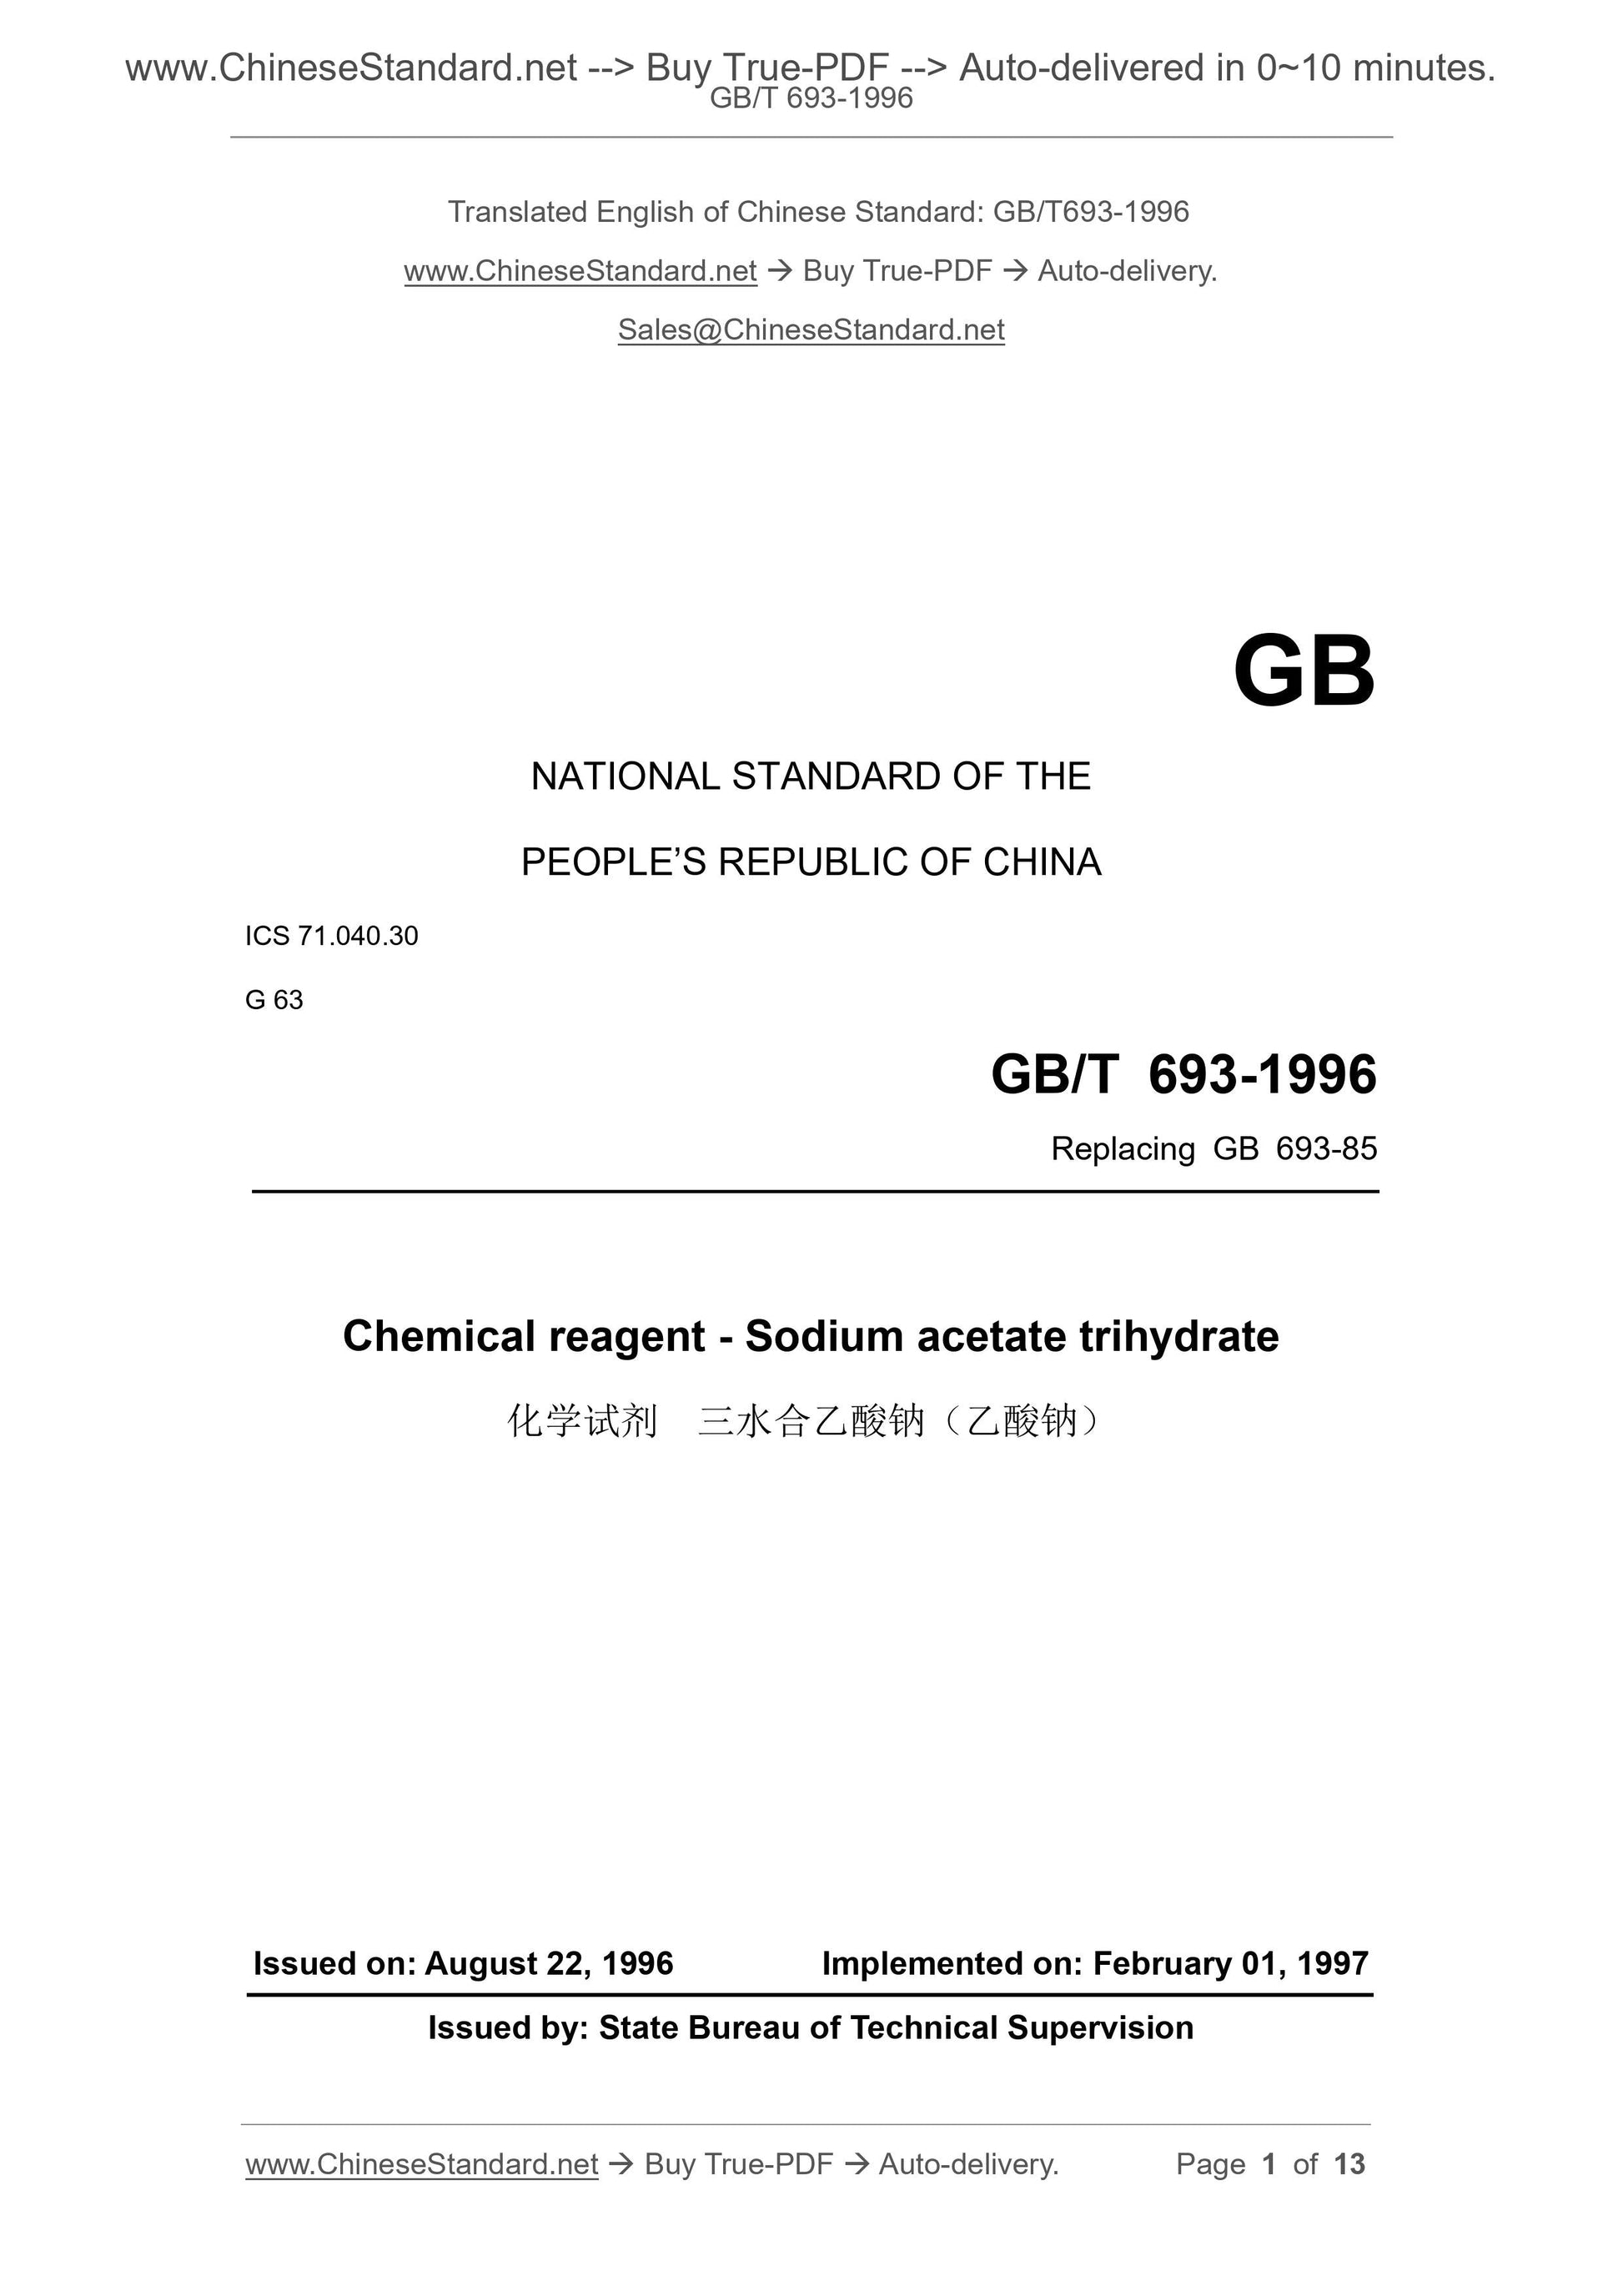 GB/T 693-1996 Page 1